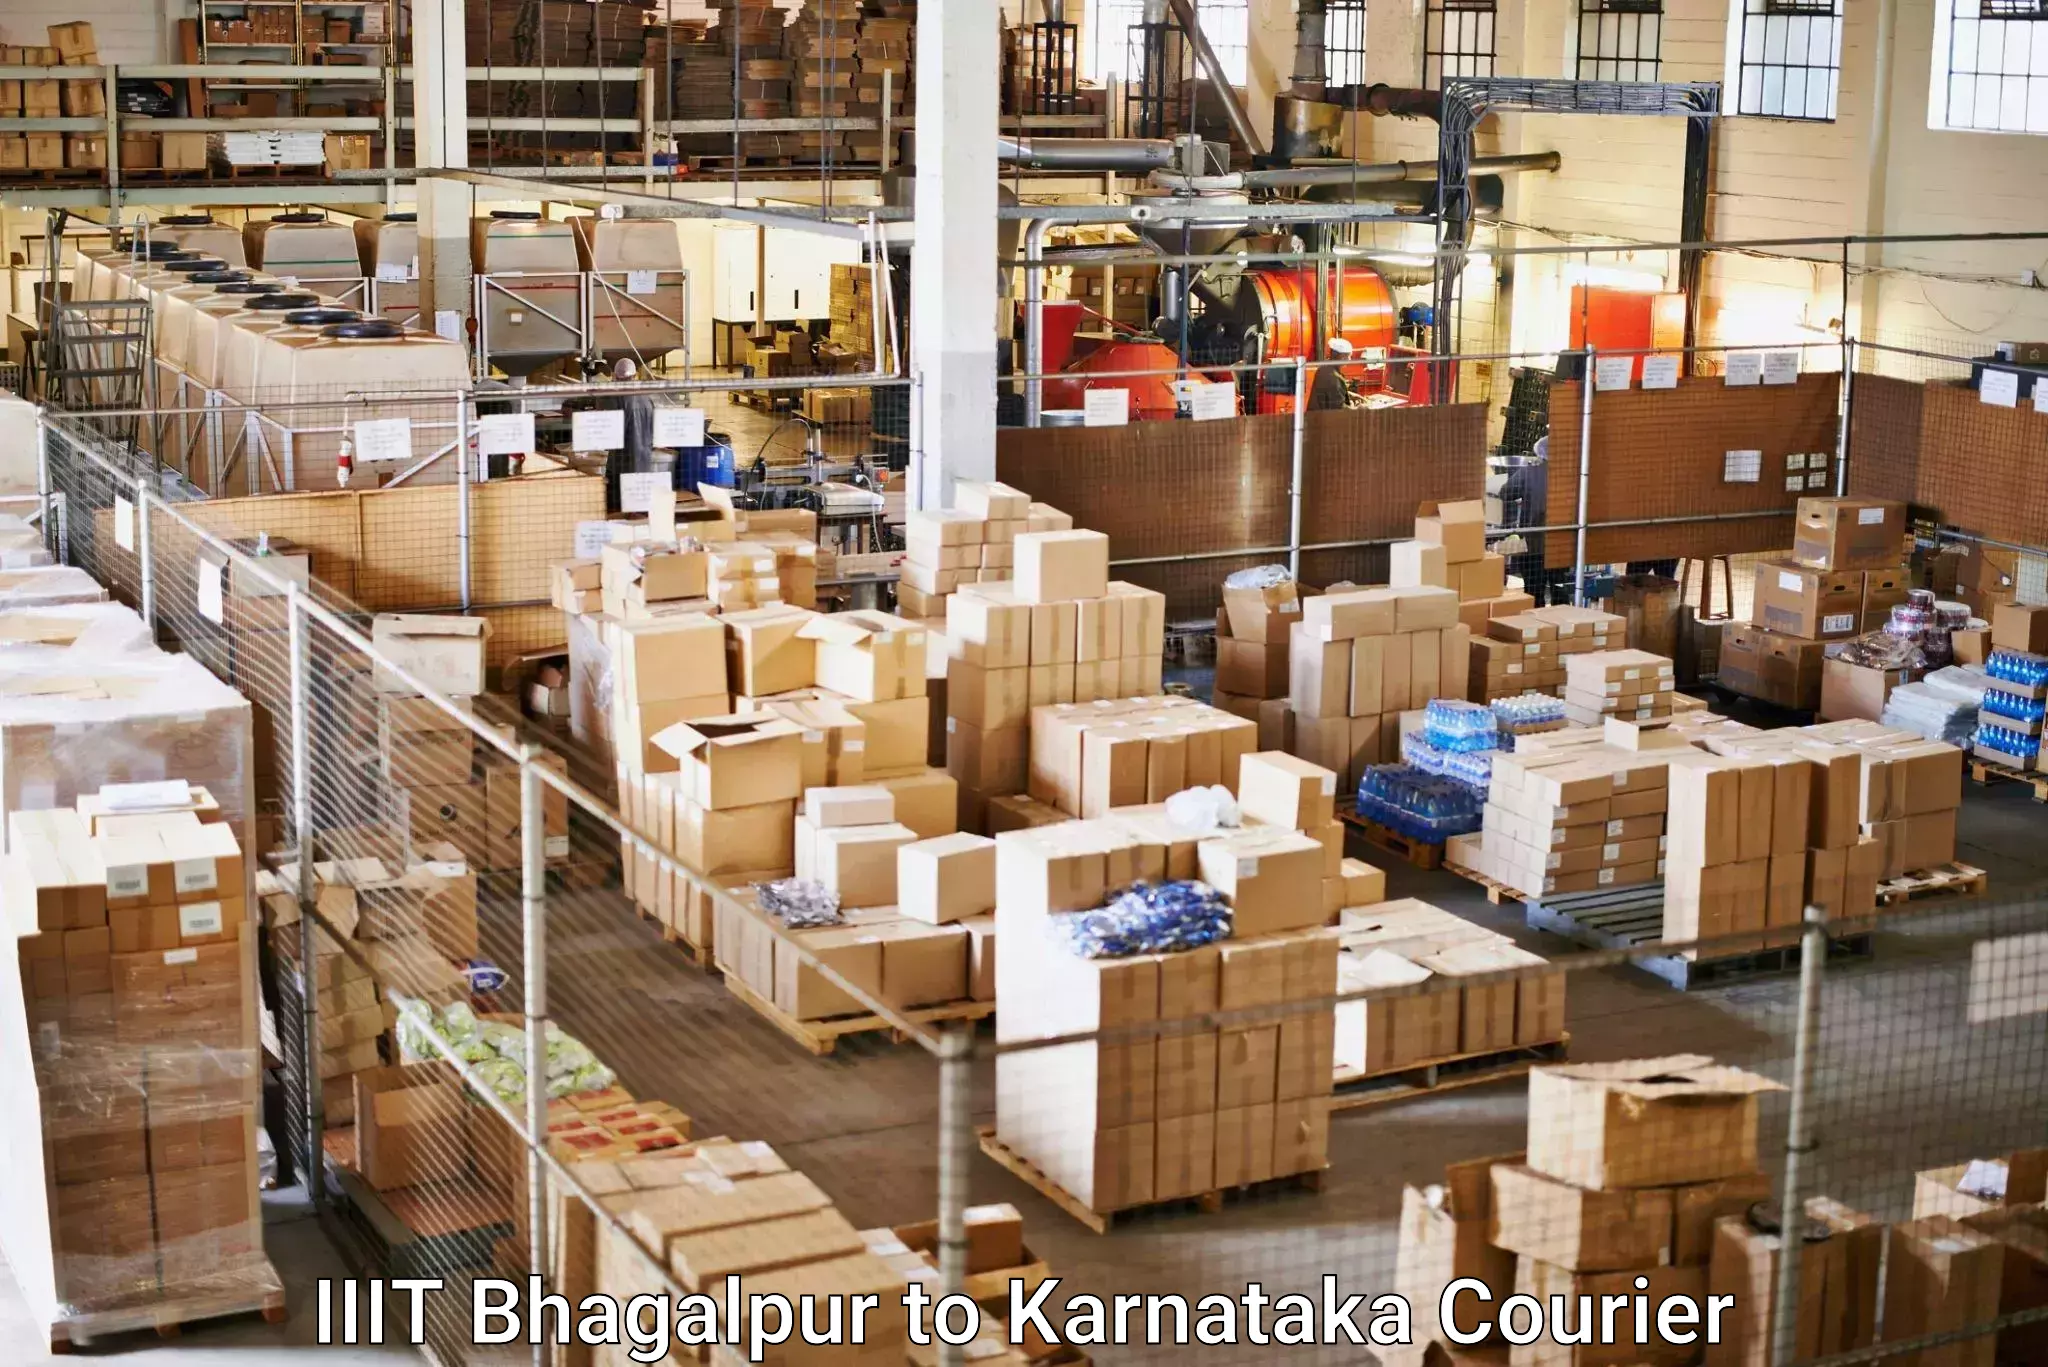 Tech-enabled shipping in IIIT Bhagalpur to Yellare